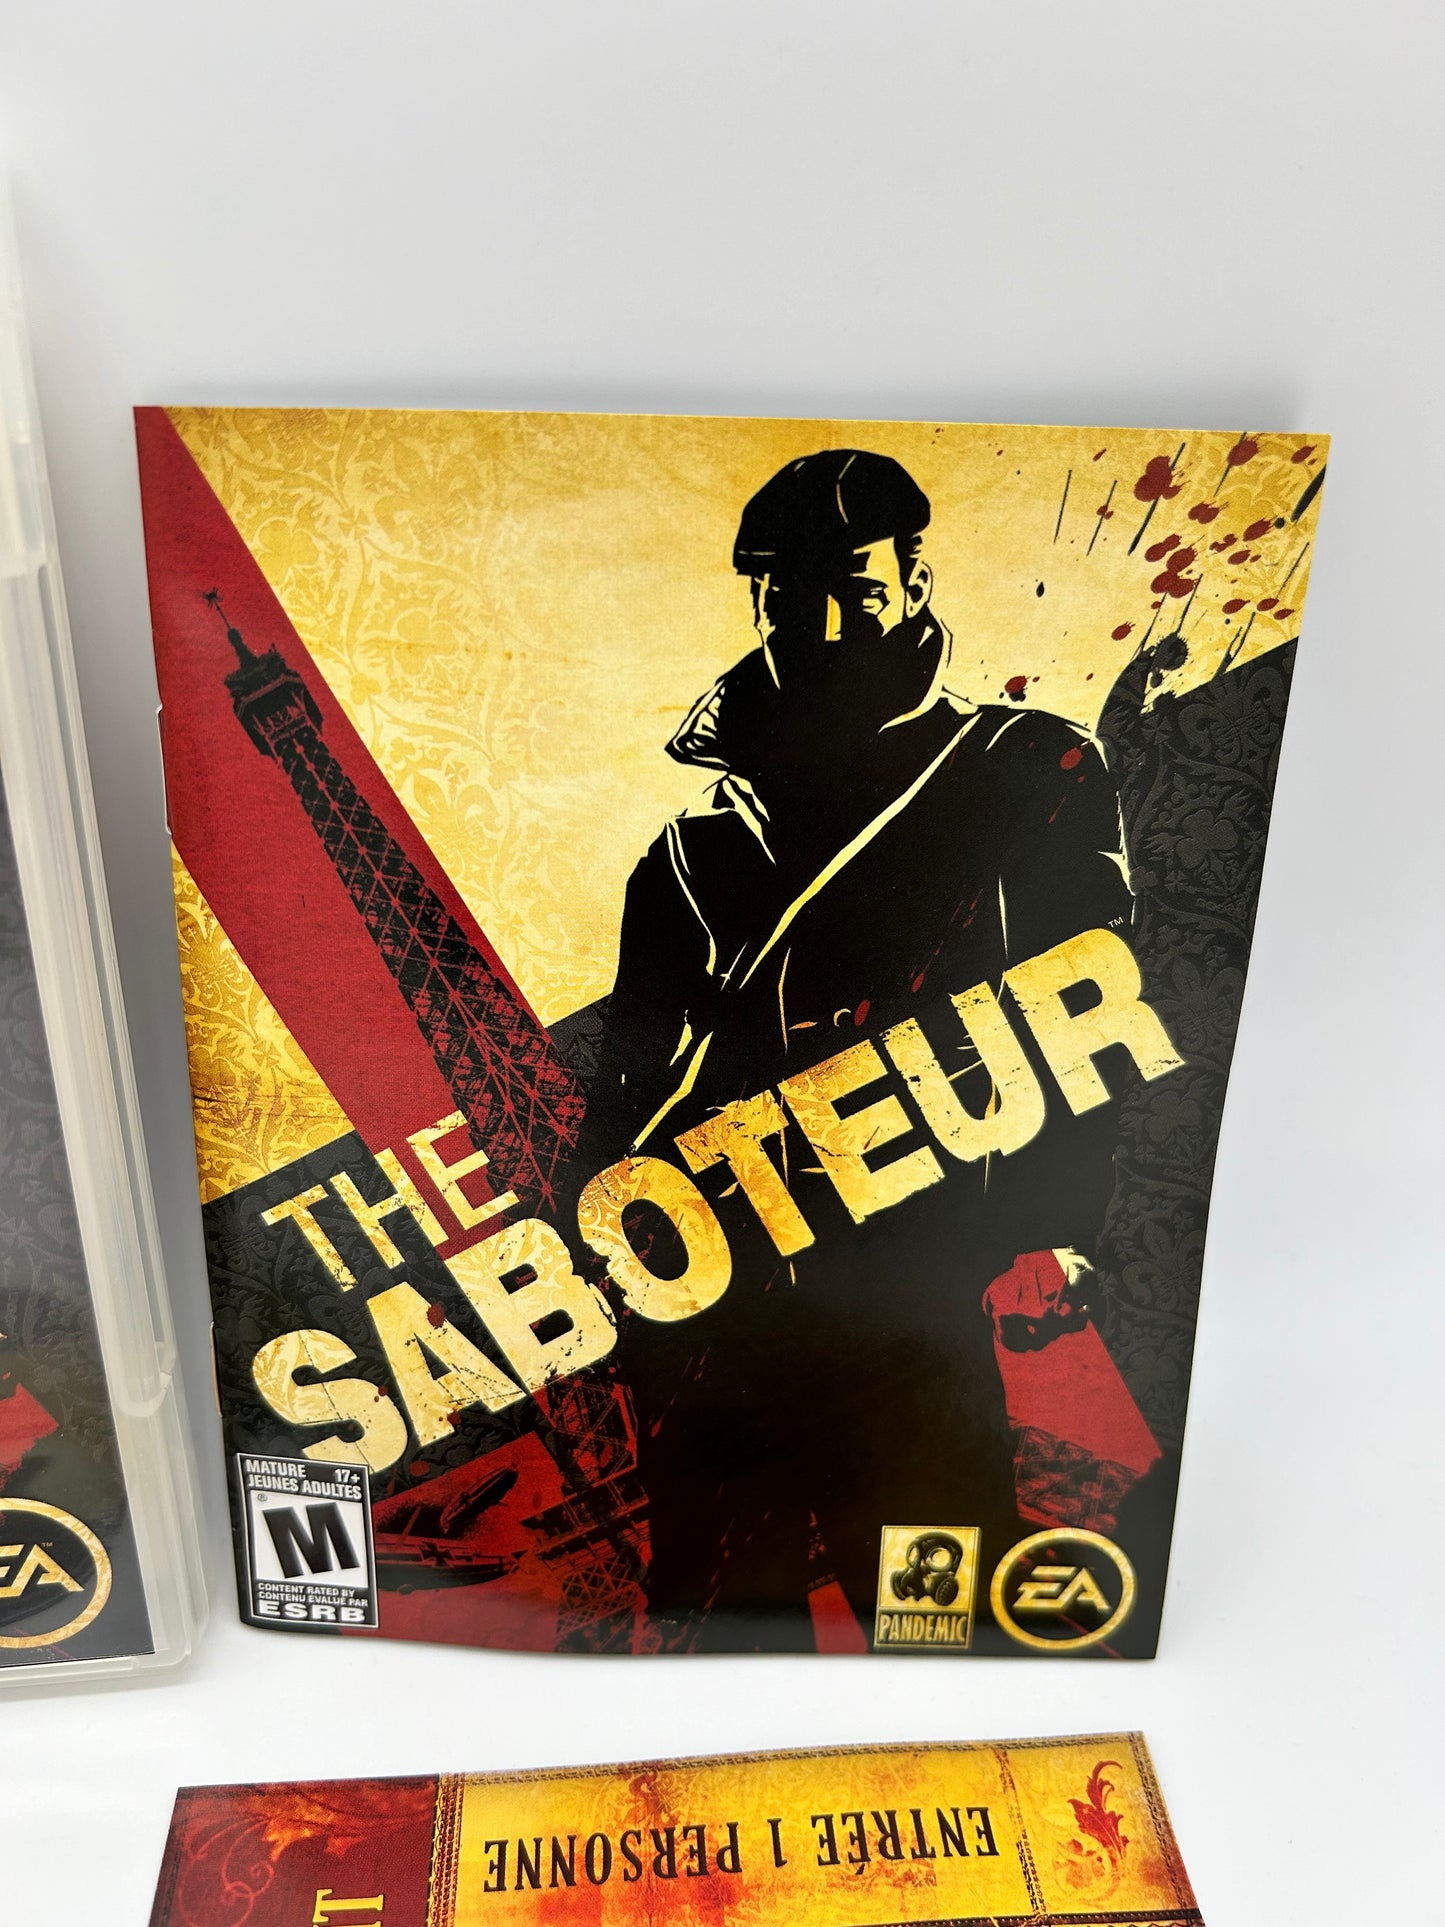 SONY PLAYSTATiON 3 [PS3] | THE SABOTEUR